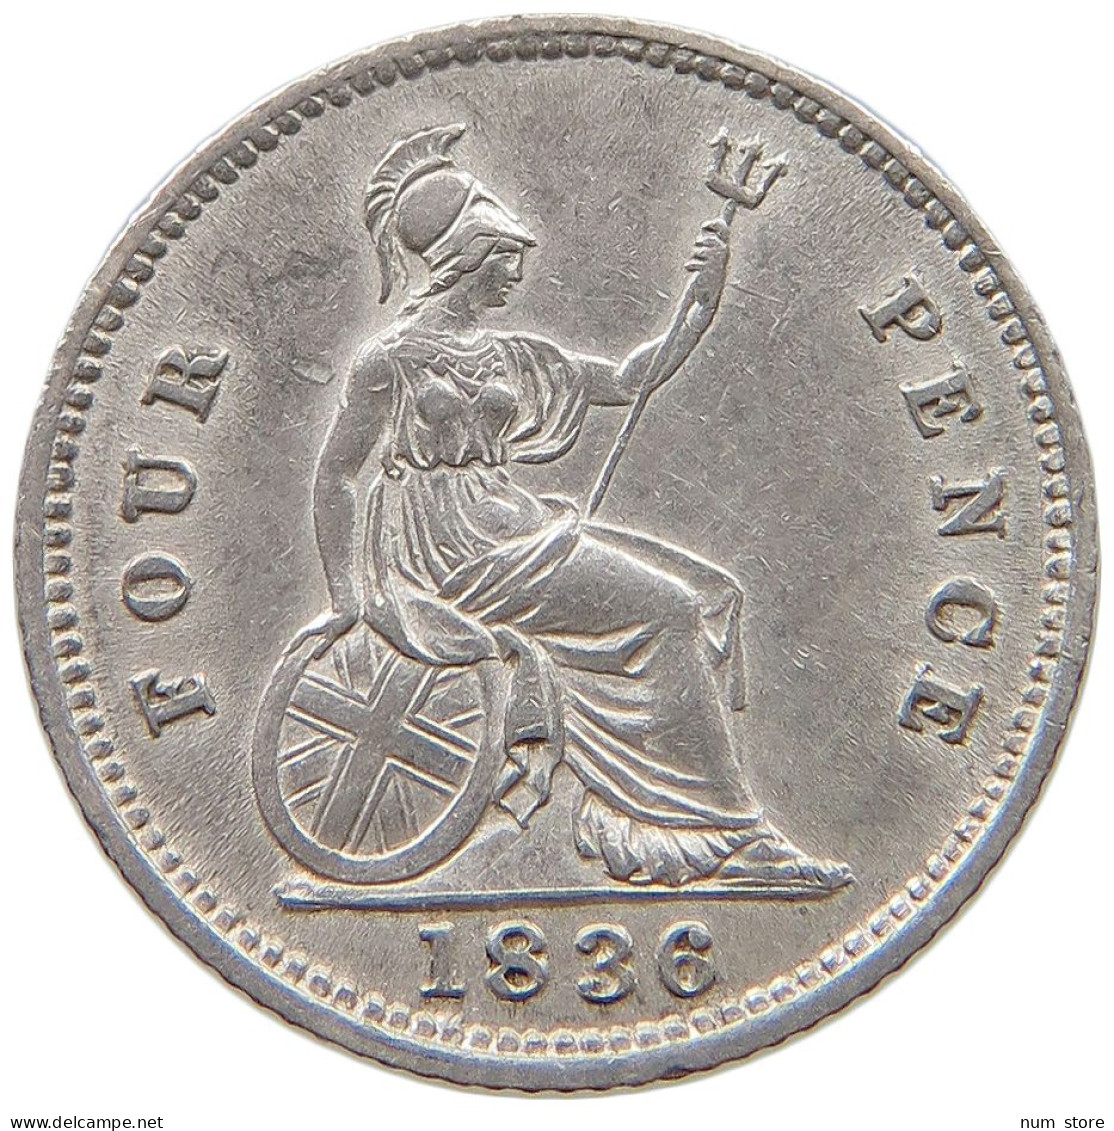 GREAT BRITAIN FOURPENCE 1836 WILLIAM IV. (1830-1837) #t112 1347 - G. 4 Pence/ Groat